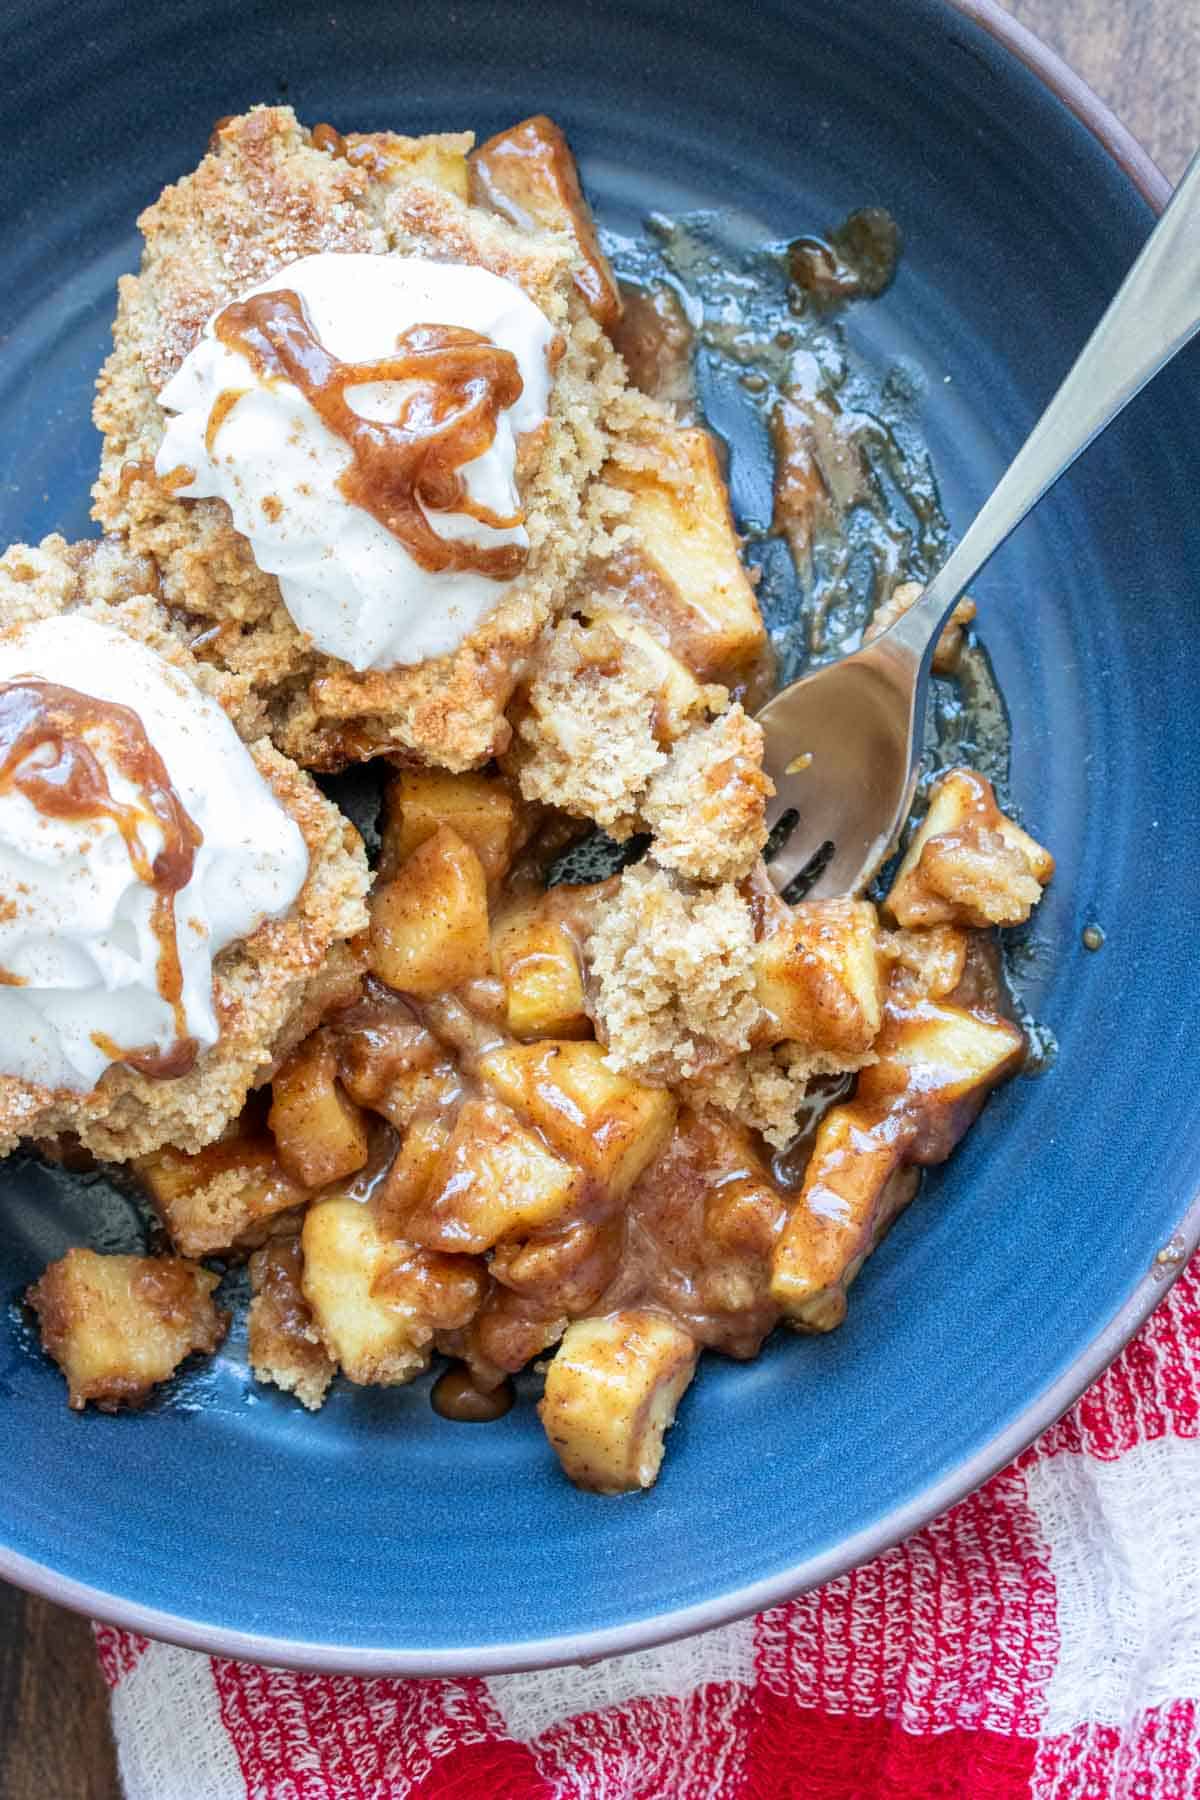 Fork eating apple cobbler with whipped cream in a dark blue bowl